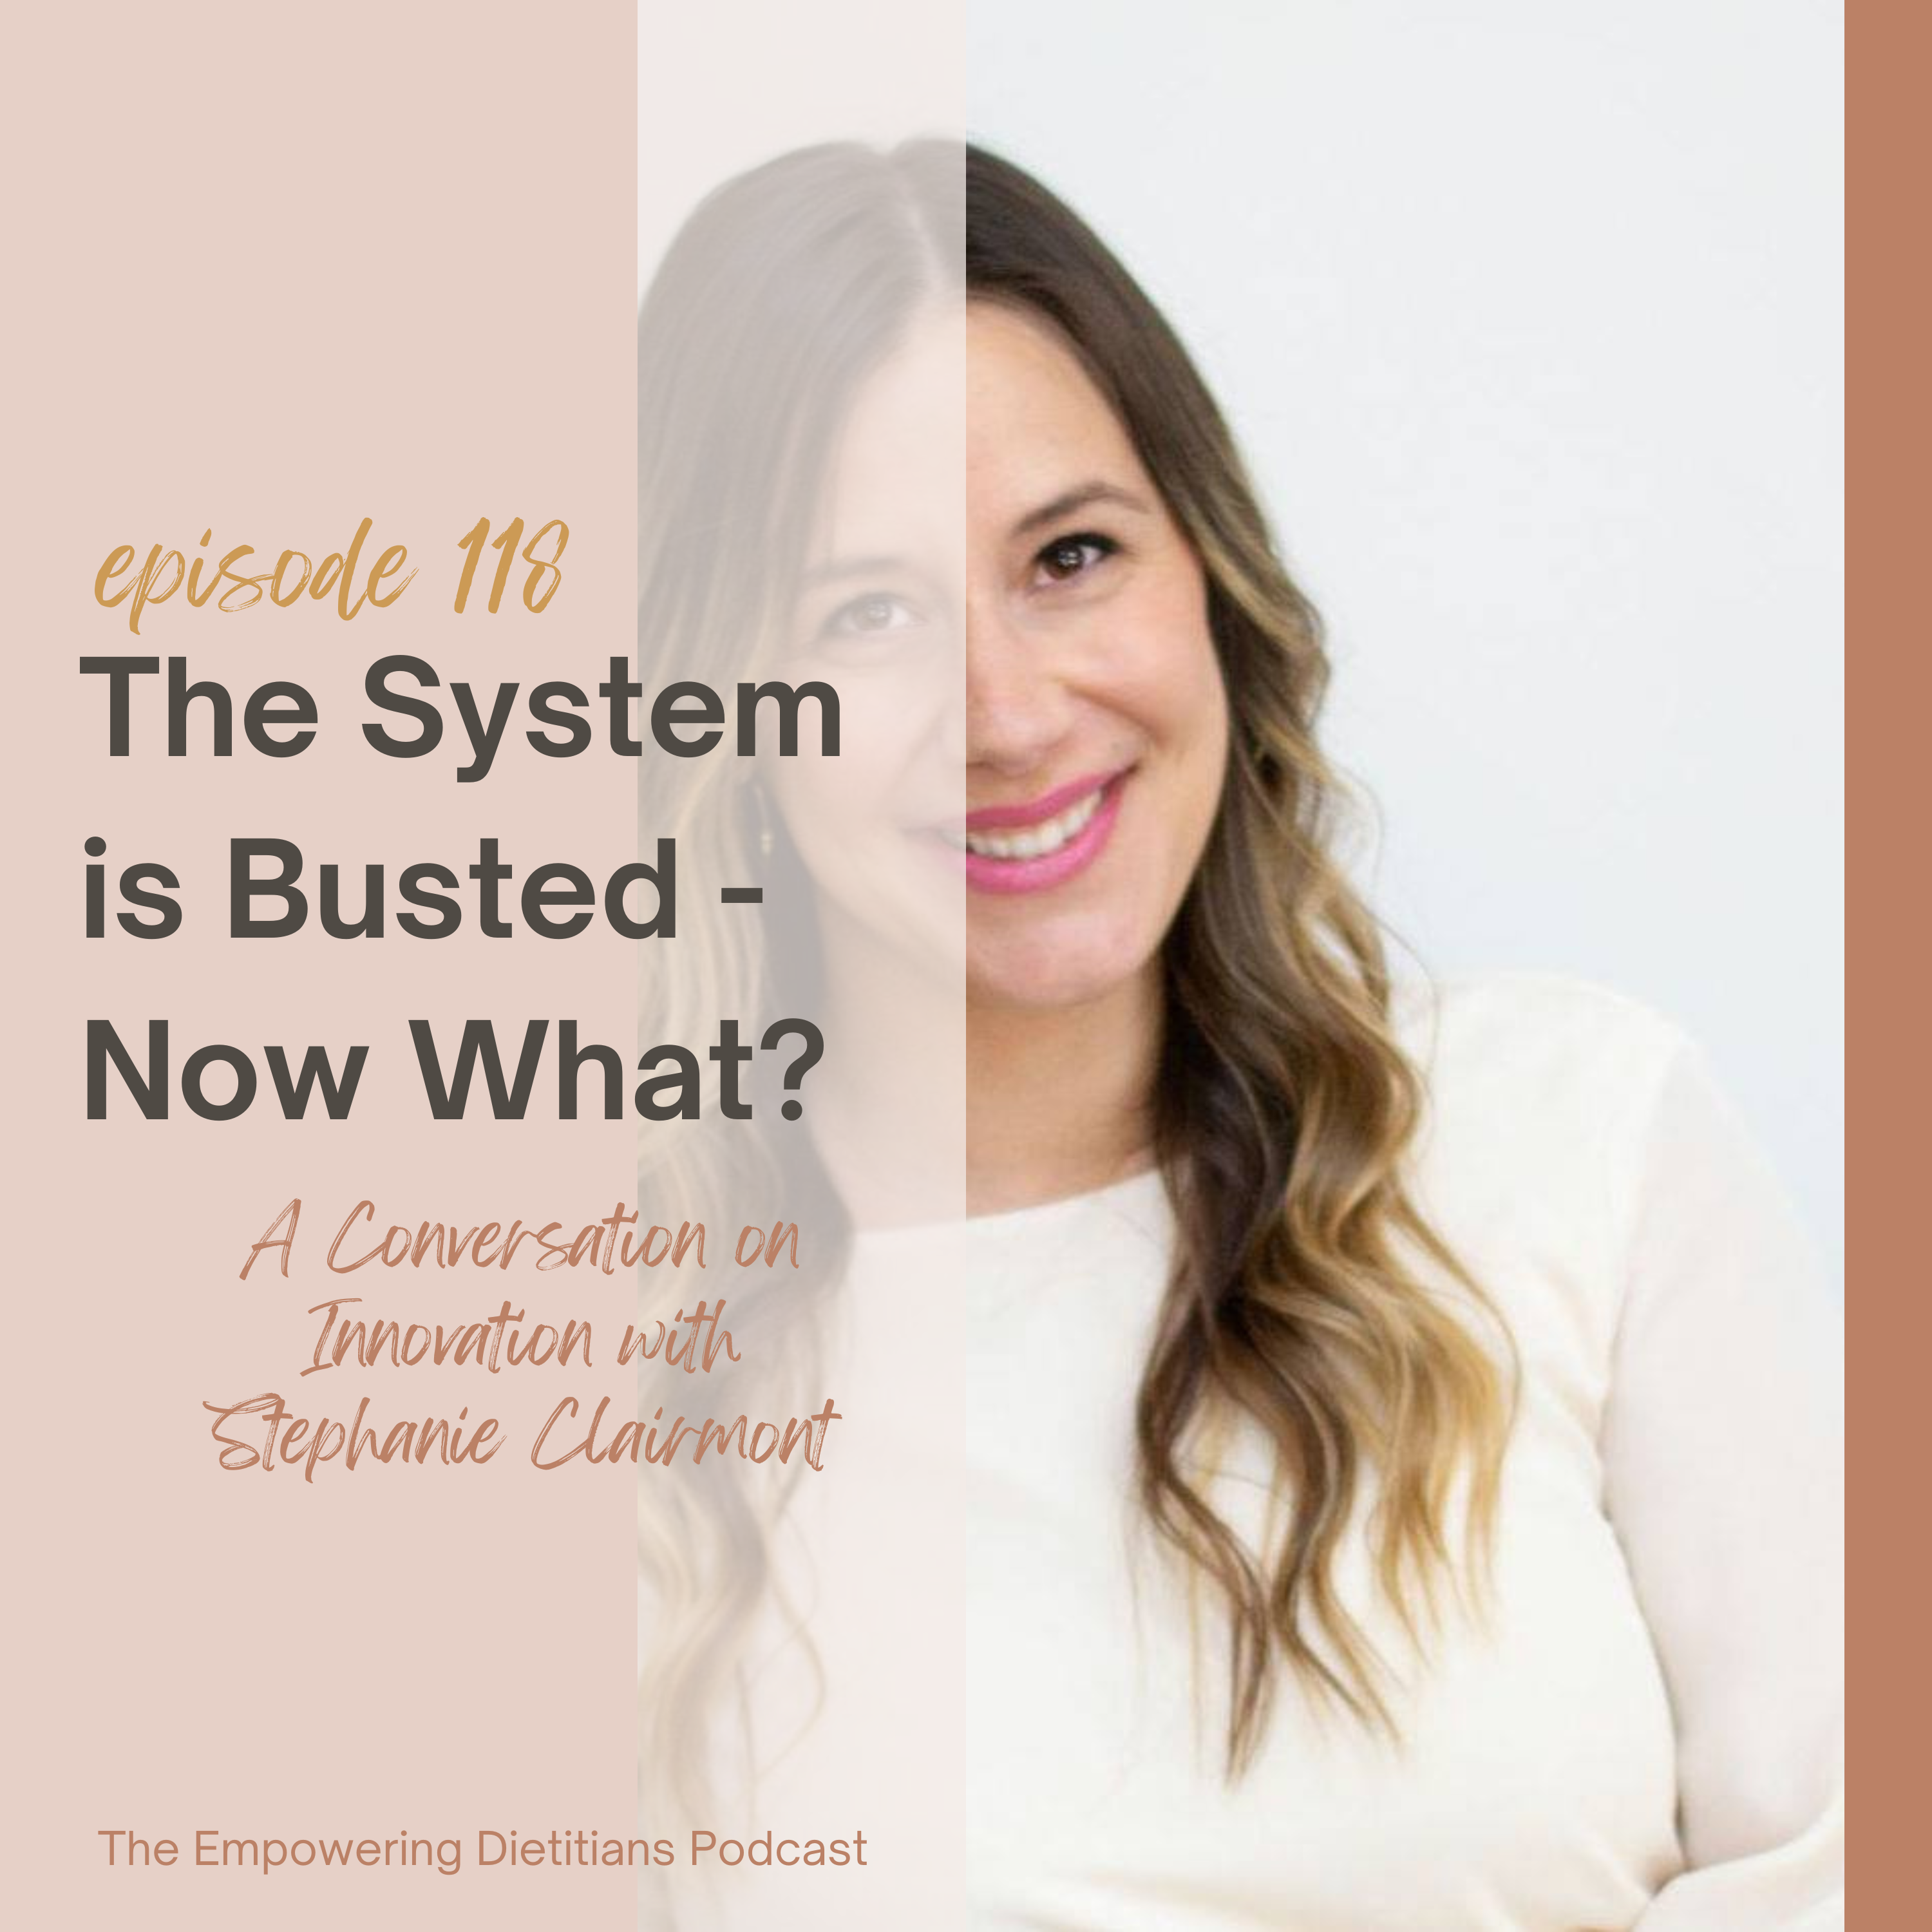 the system is busted now what? A Conversation on Innovation with stephanie clairmont